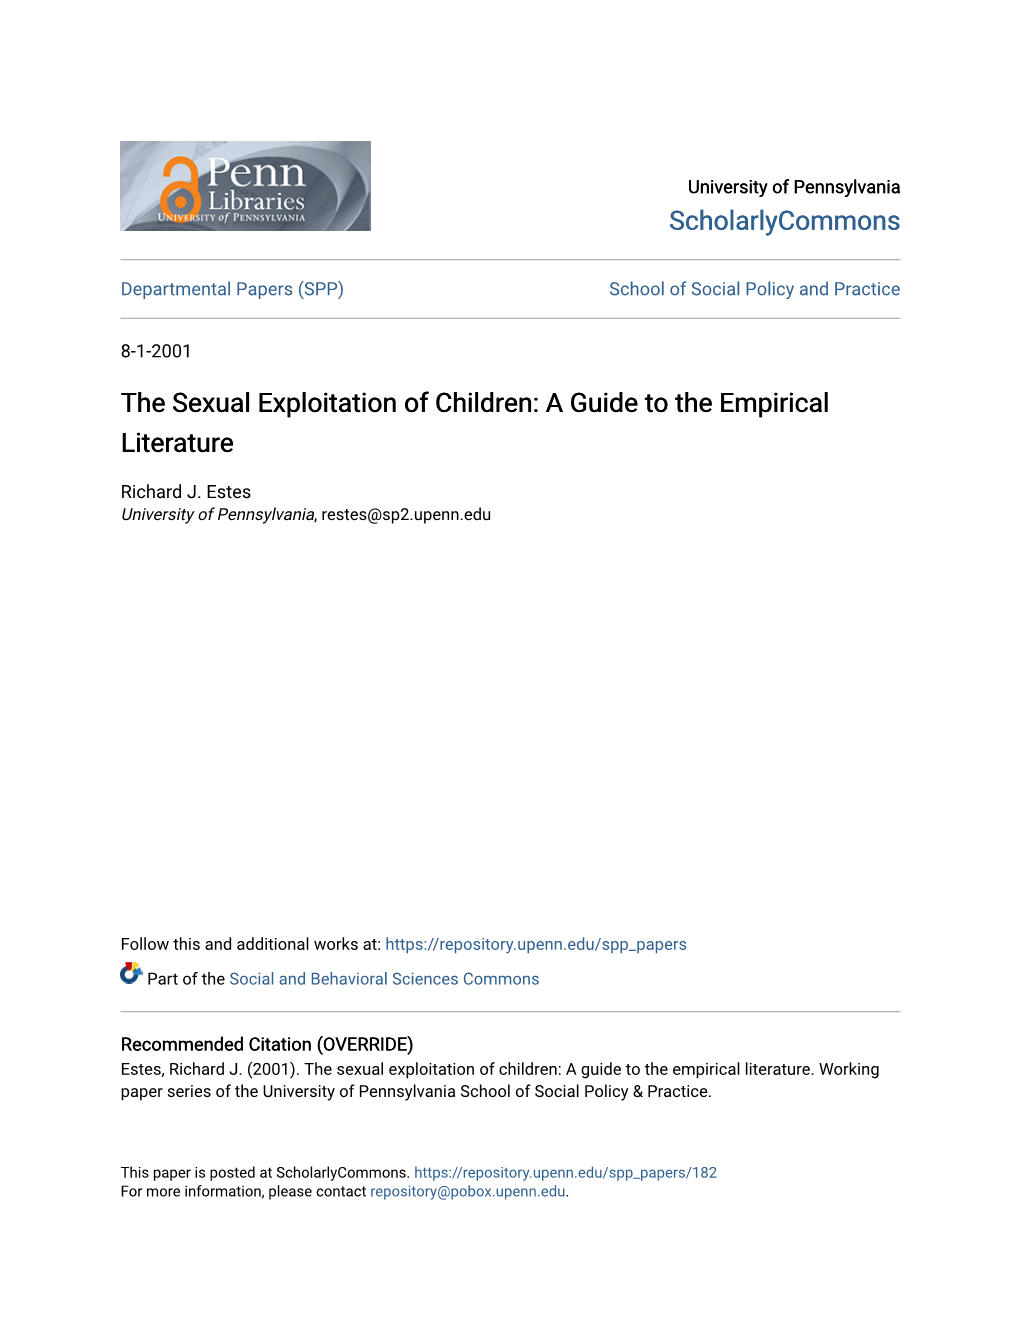 The Sexual Exploitation of Children: a Guide to the Empirical Literature